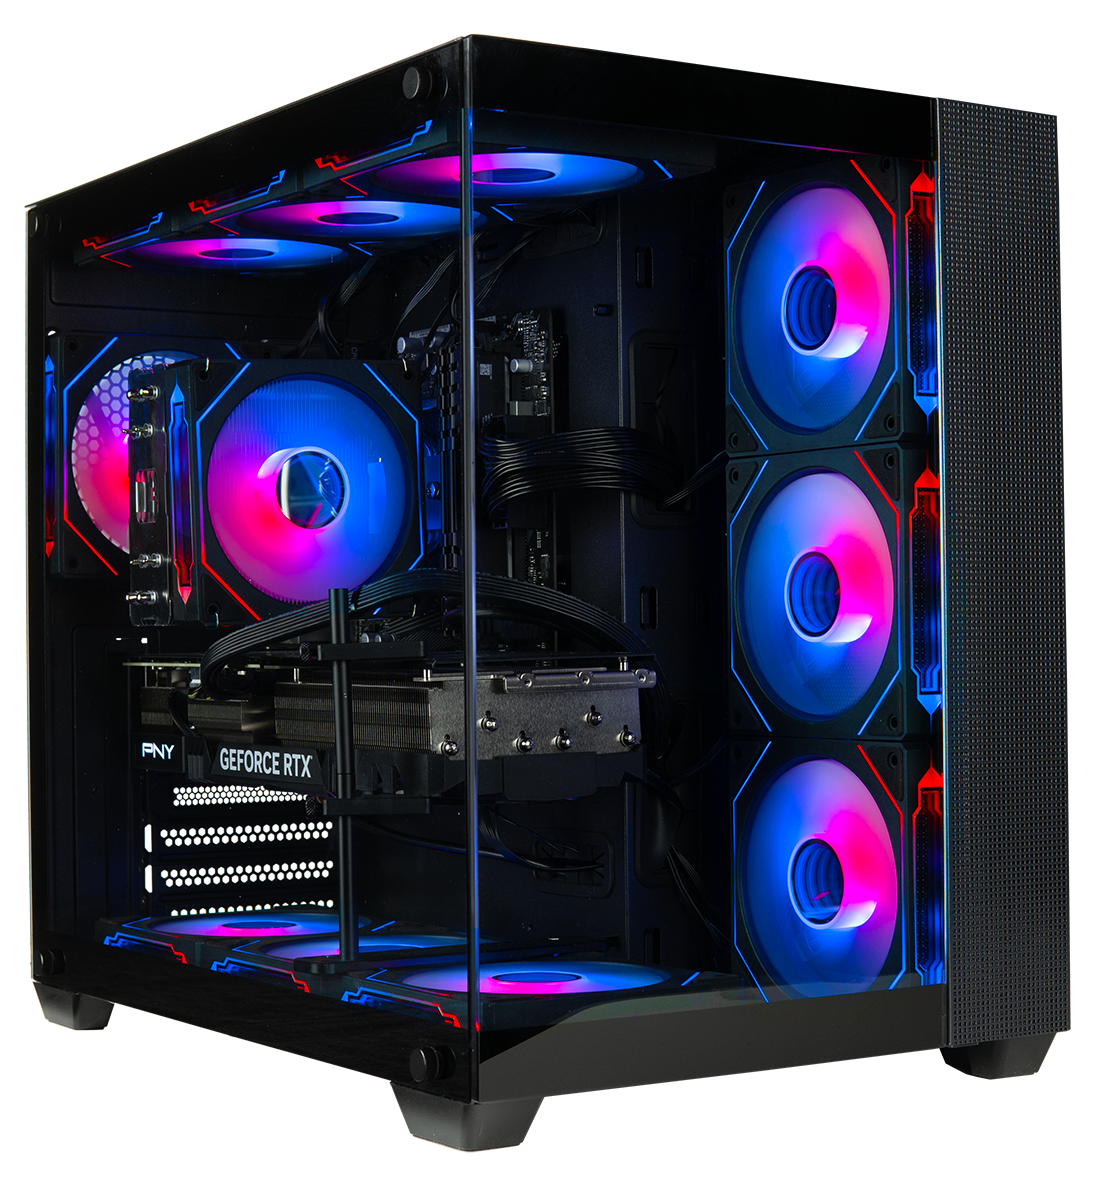 With a 4080 TI GPU powered 240 fps gaming pc, the Panorama competes with Legion PC Tower 5i 5 7i and Acer Predator Orion 3000